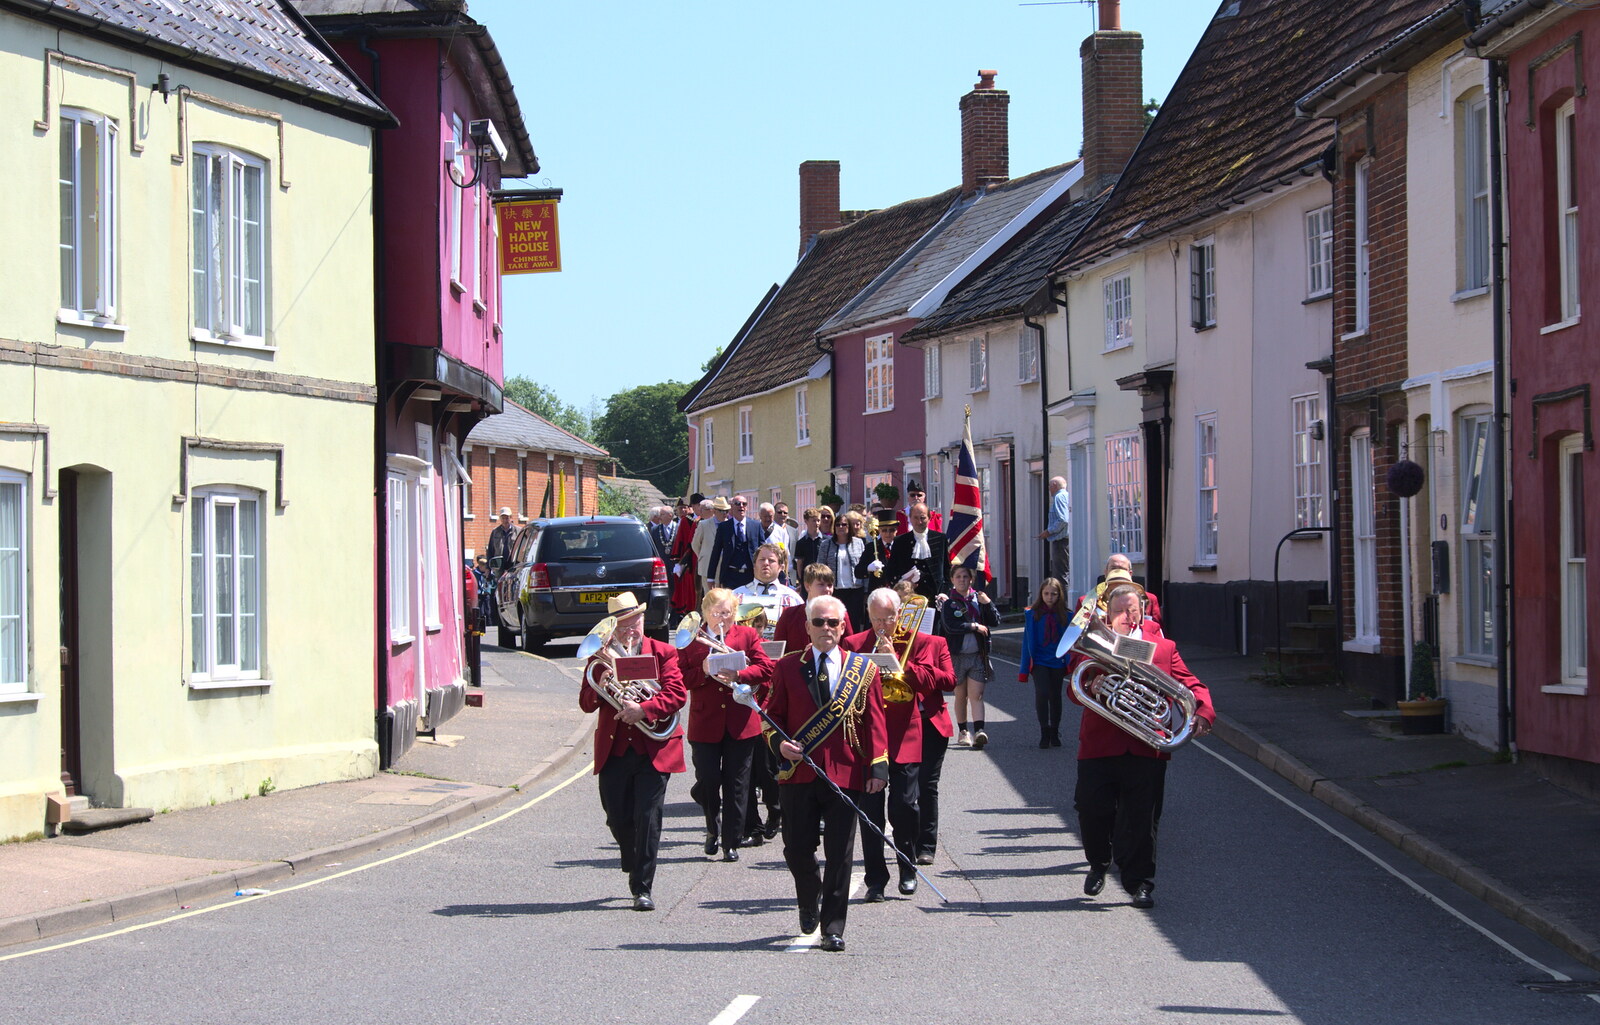 The GSB passes New Happy House from A Trip to the Office and the Mayor-Making Parade, Eye, Suffolk - 4th June 2016